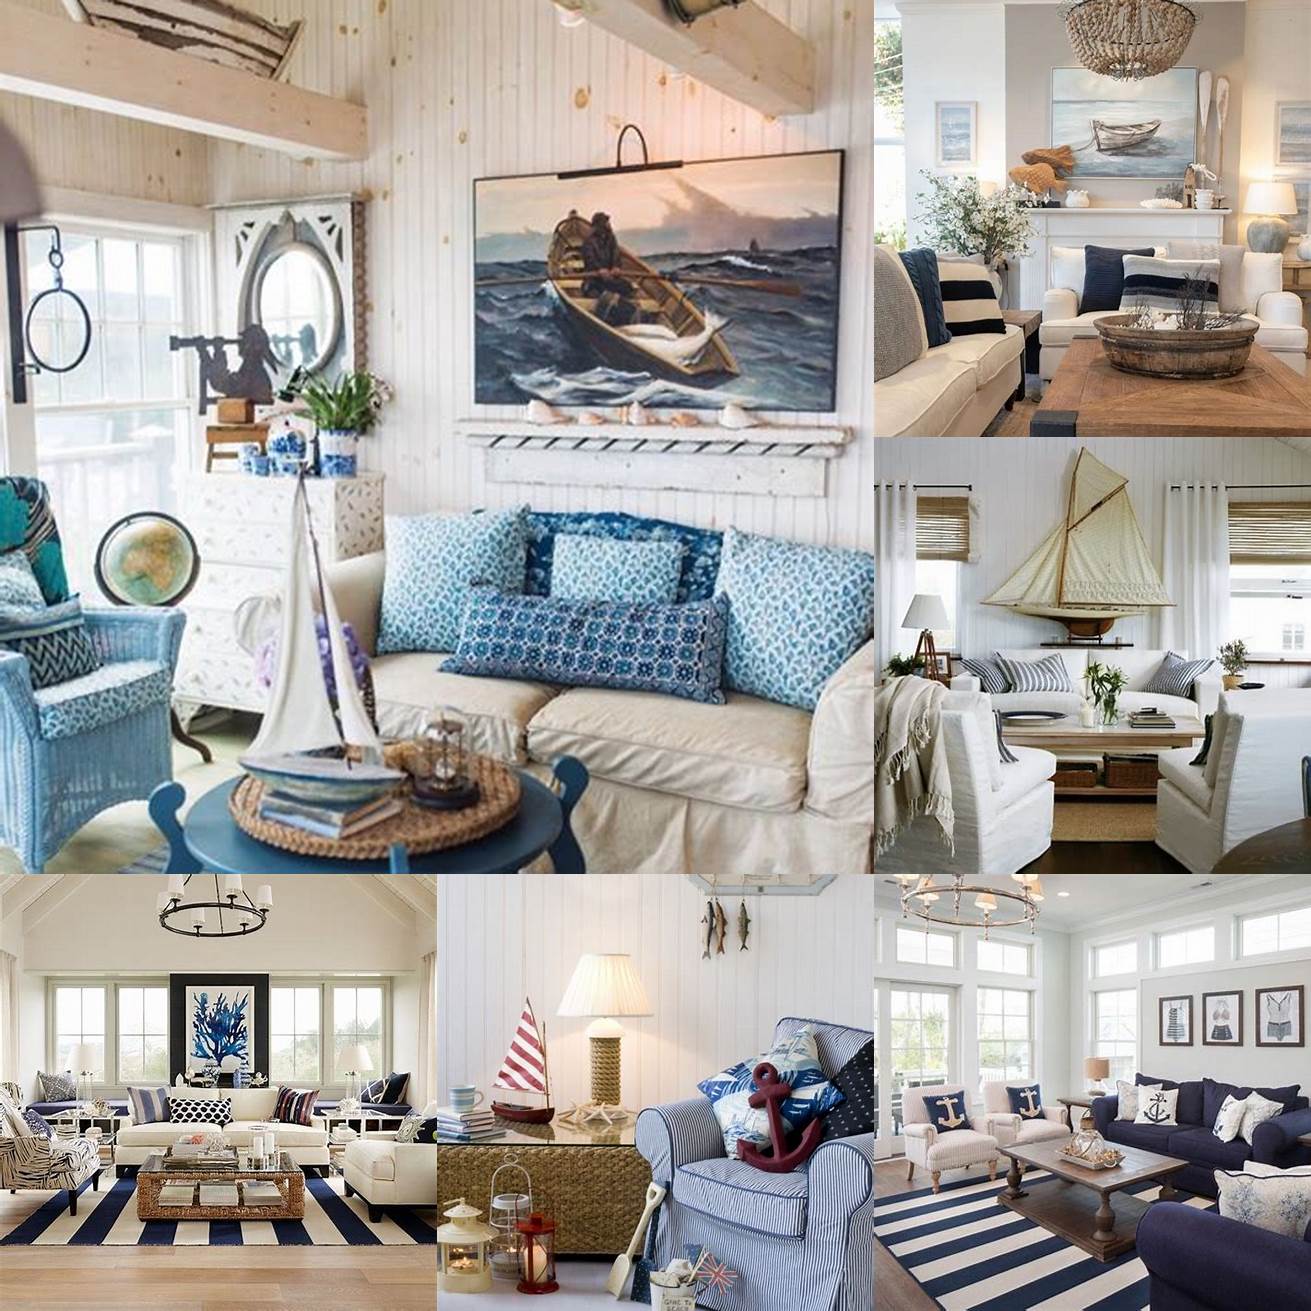 Nautical decor can be overdone leading to a cheesy or cliche look